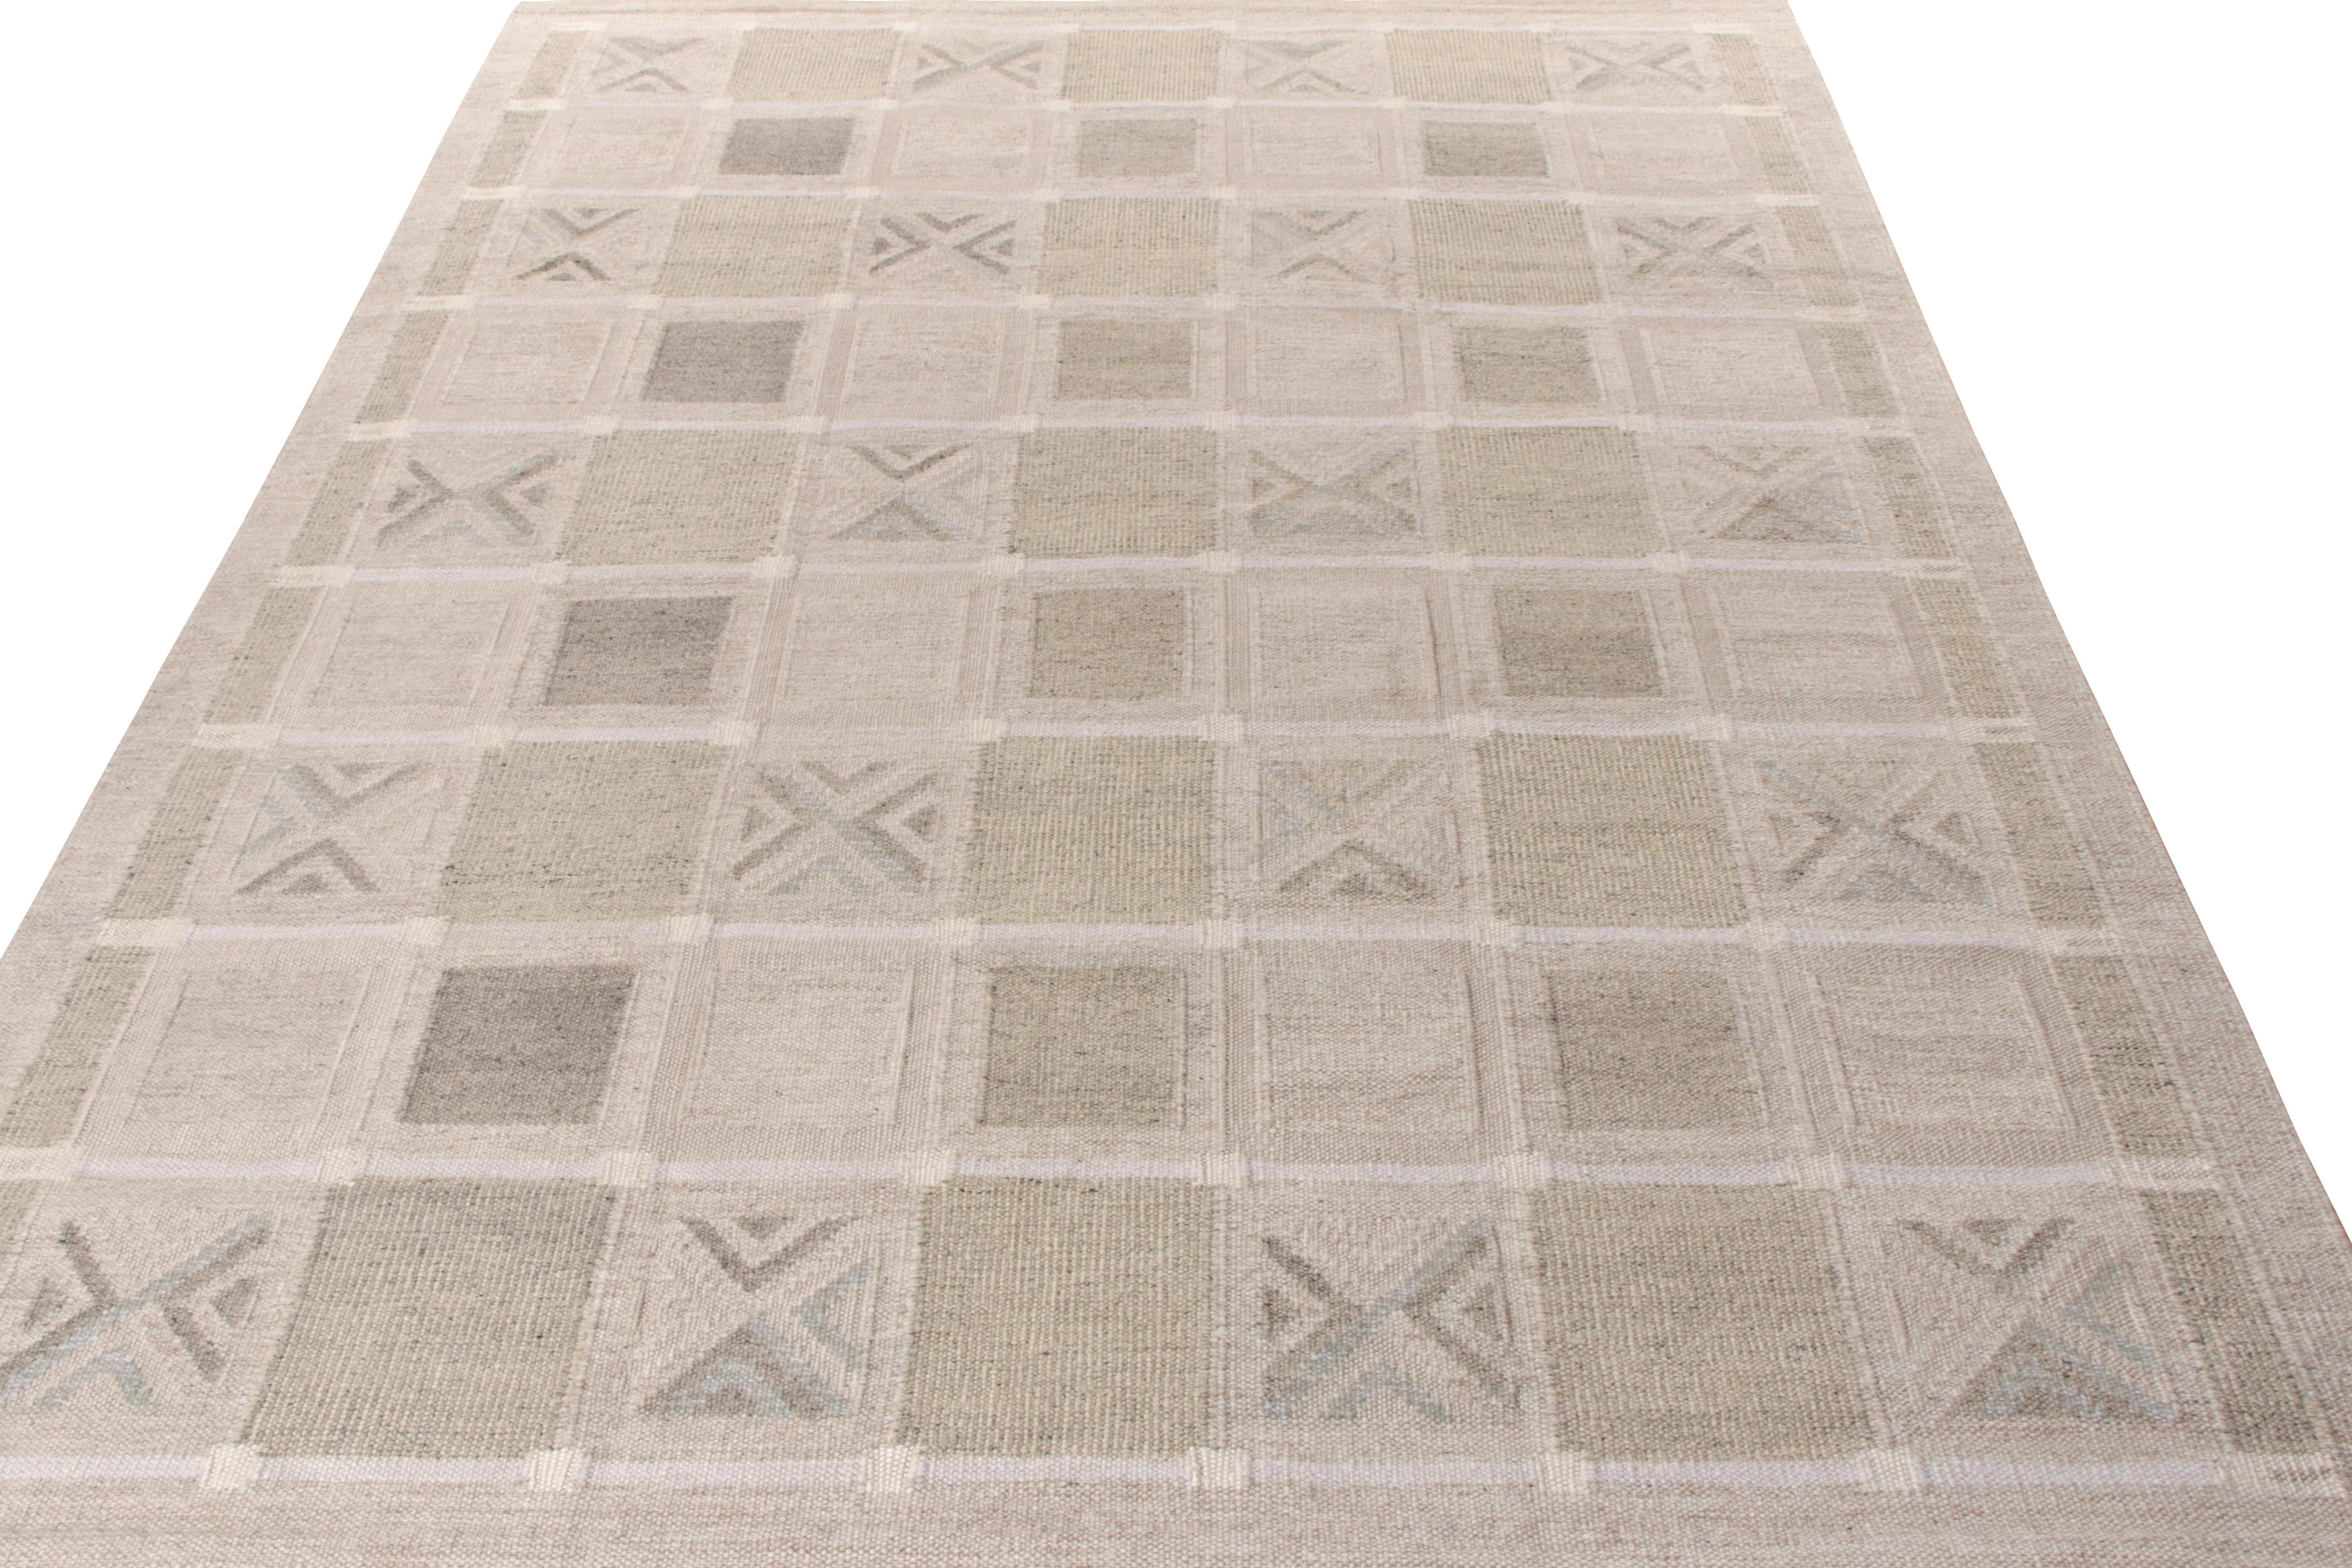 A custom flat weave design from Rug & Kilim’s coveted Scandinavian Kilim Collection. With utmost durability and buckle resistance, this particular take on mid-century Scandinavian style enjoys a uniform pattern that marries geometric elements like